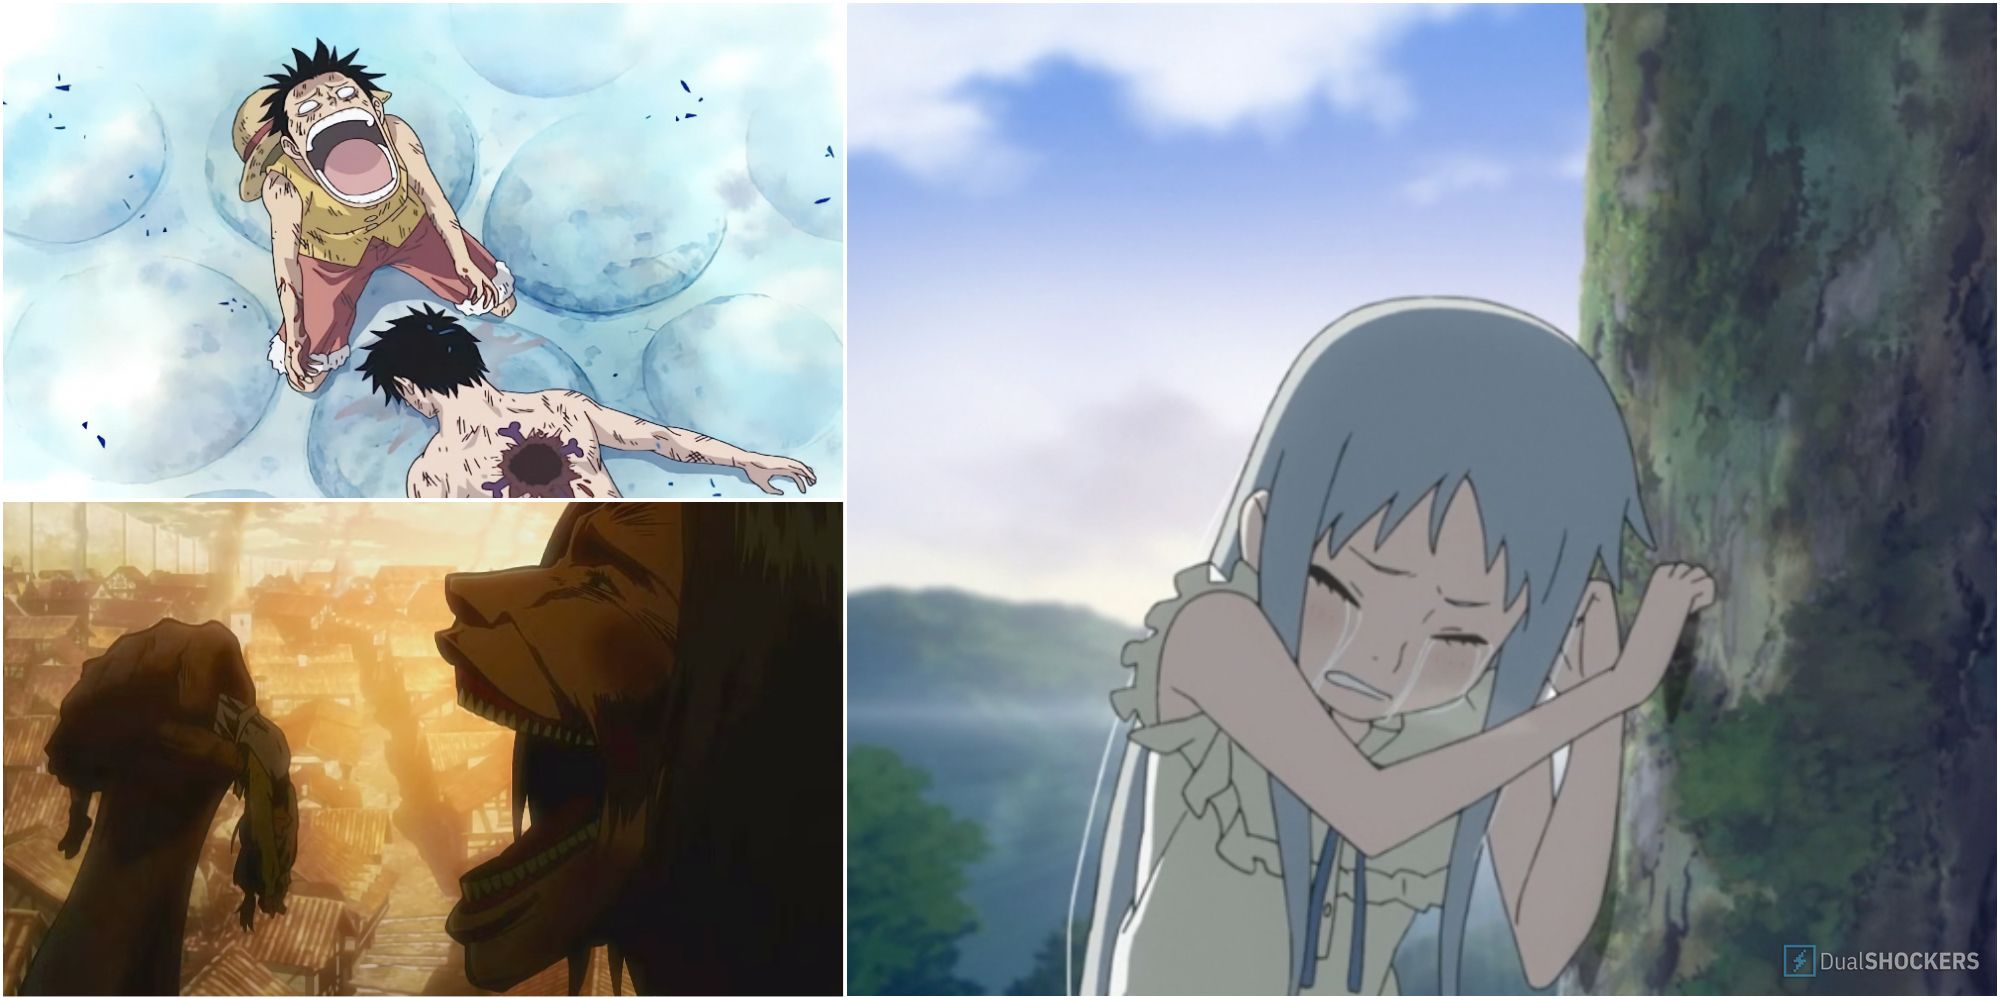 What is the saddest anime death of all time? - Quora